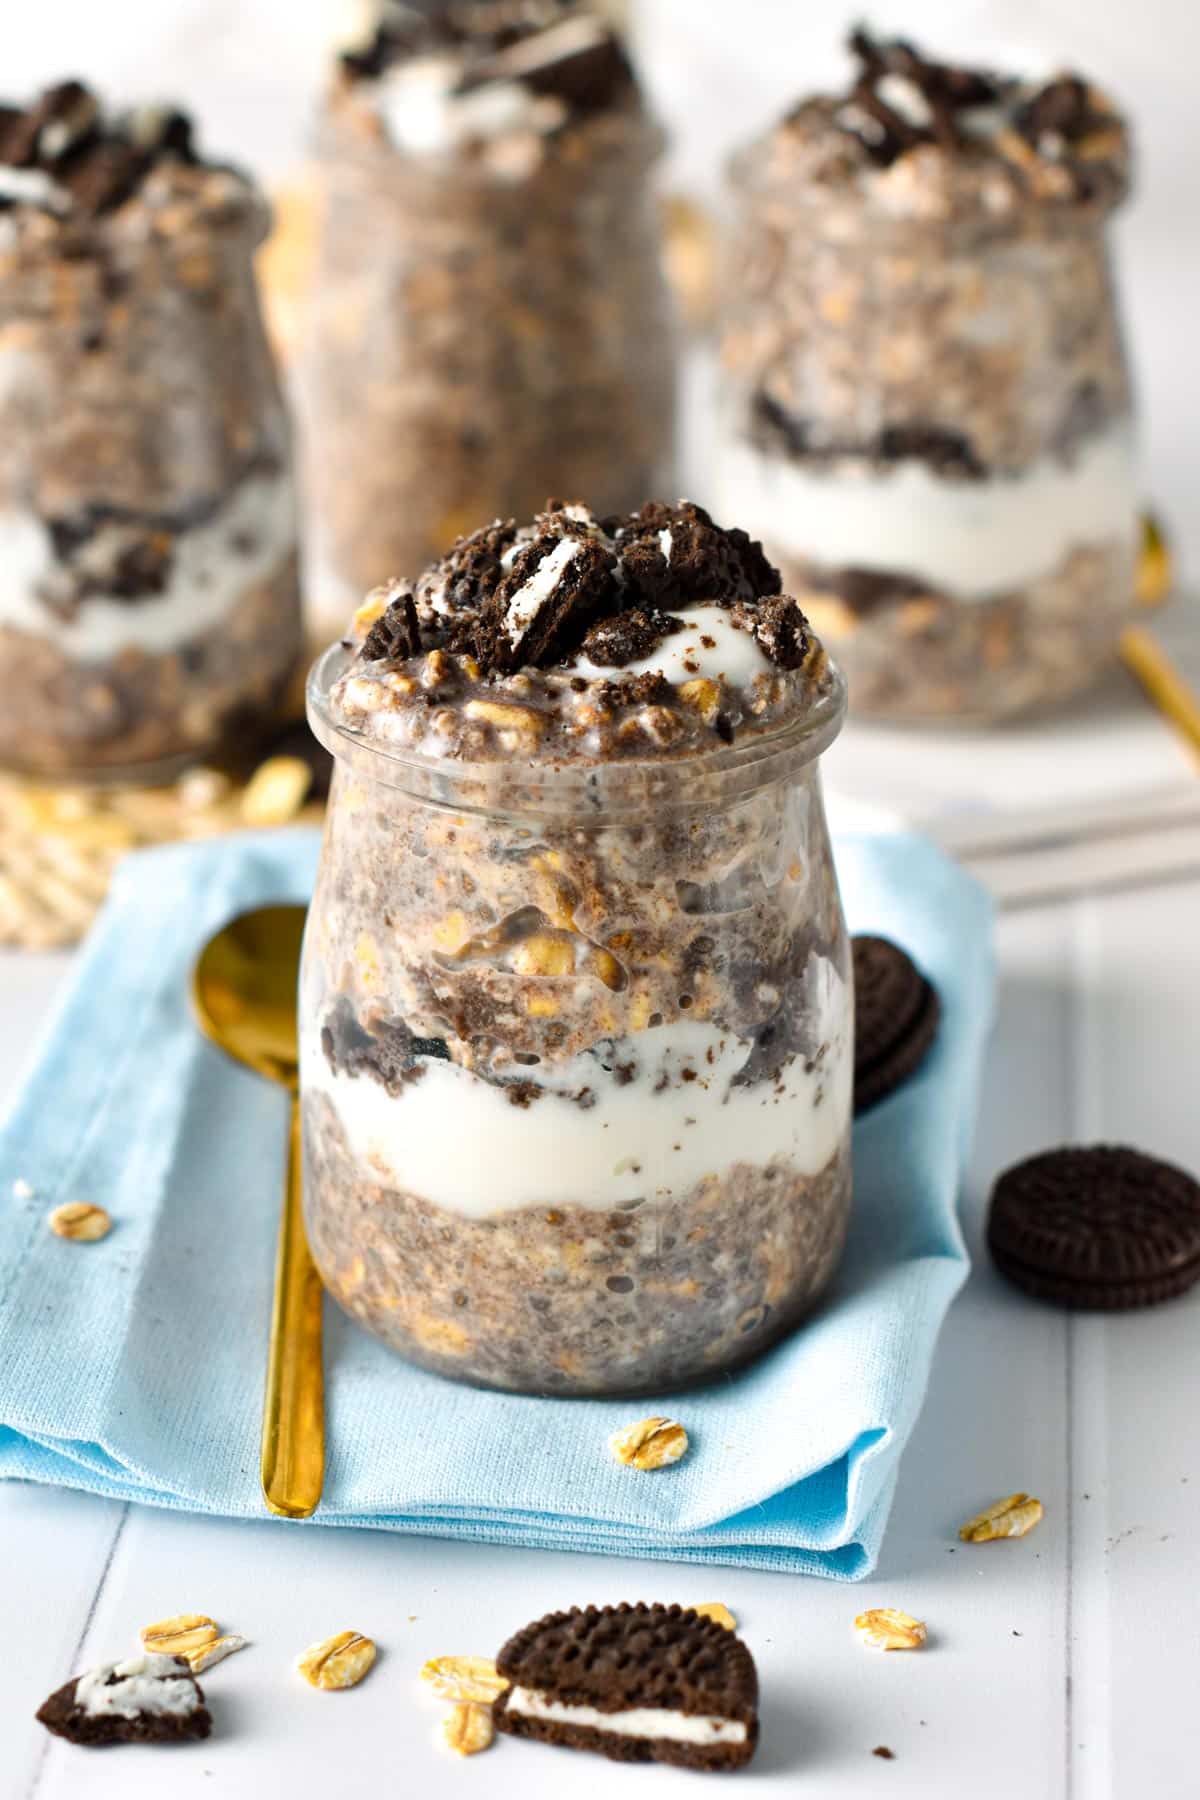 This Oreo Overnight Oats recipe is like having dessert for breakfast! It has all the healthy ingredients from the classic overnight oats recipe with a touch of Oreo cookies, just for fun and flavor.